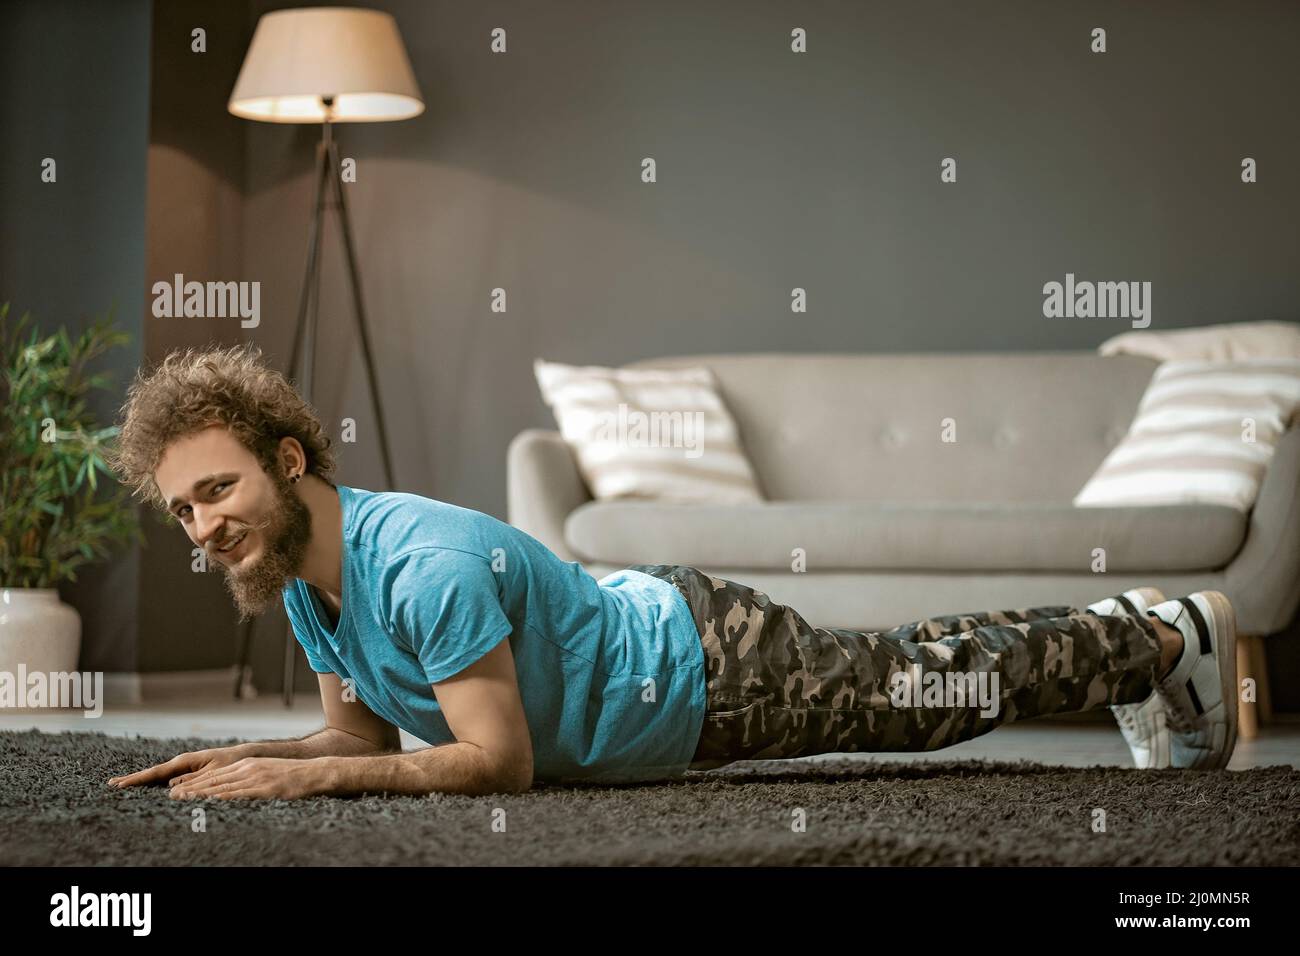 Cheerful Guy in a Blue T-shirt Does Plank Indoor. Young Man Does Up-downs to Get Fit. Medium close-up Stock Photo